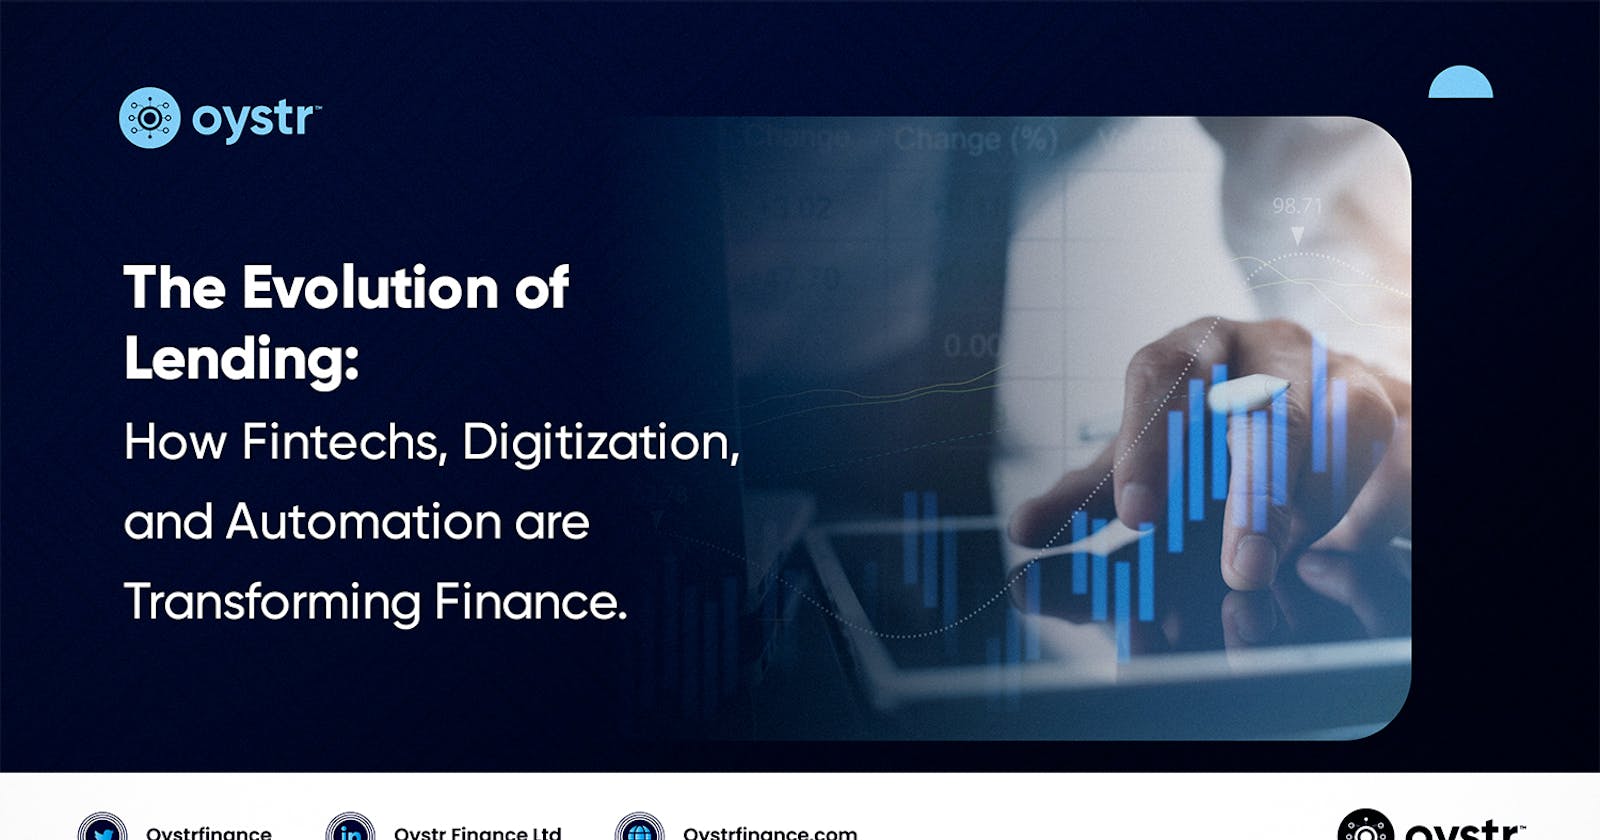 The Evolution of Lending: How Fintechs, Digitization and Automation are transforming Finance